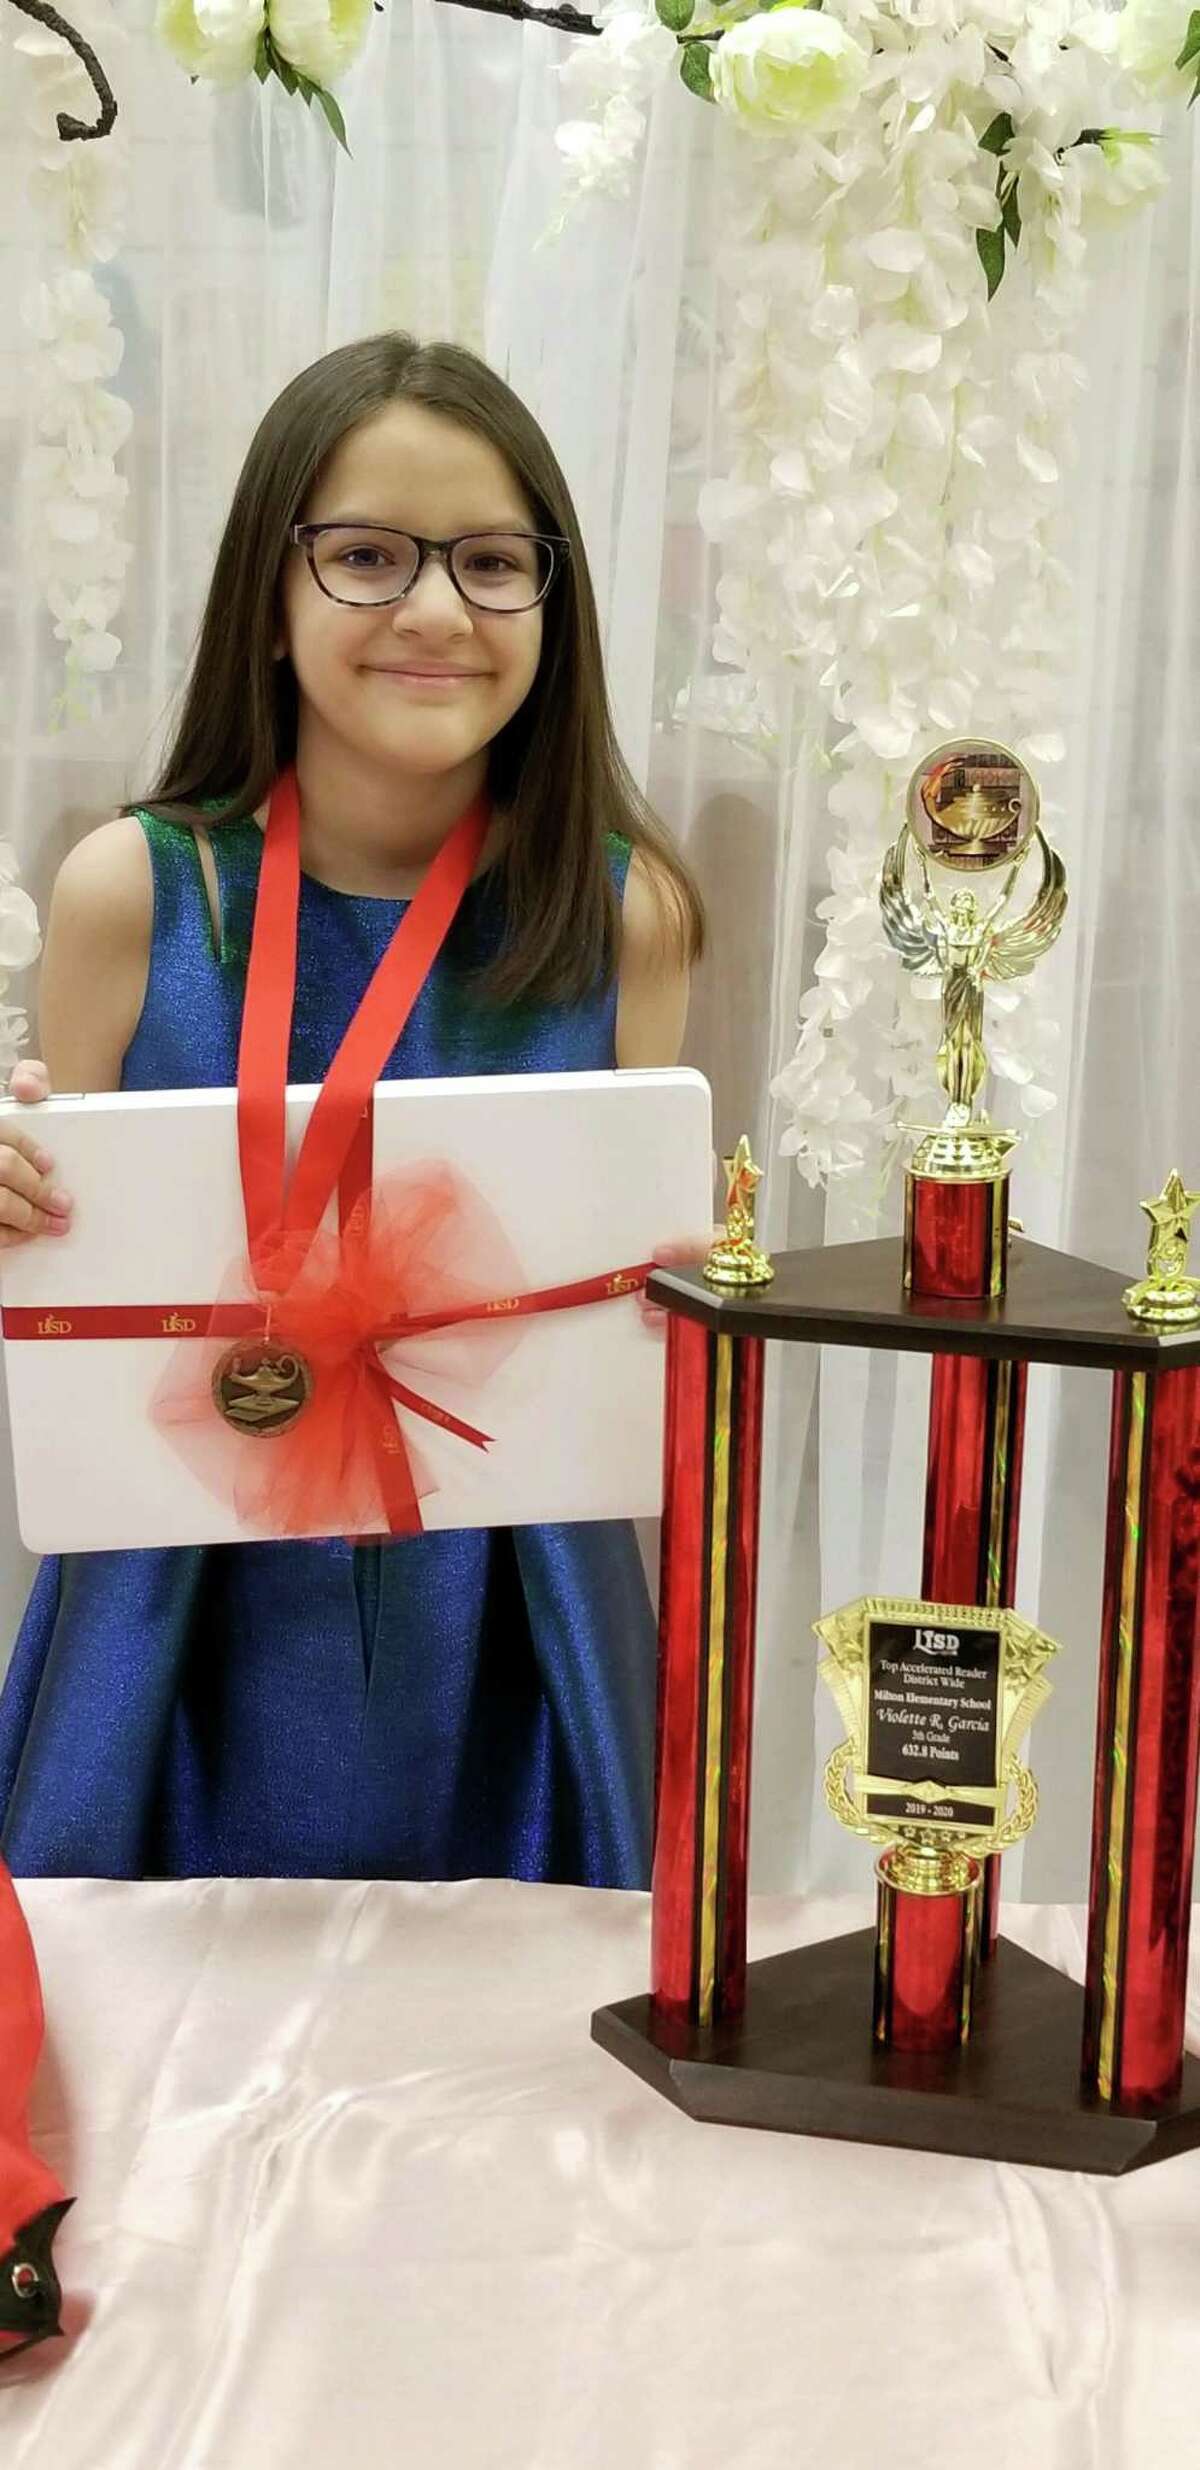 Violette R. Garcia, a fifth grade student at C.L. Milton Elementary School, was LISD’s top elementary school accelerated reader.